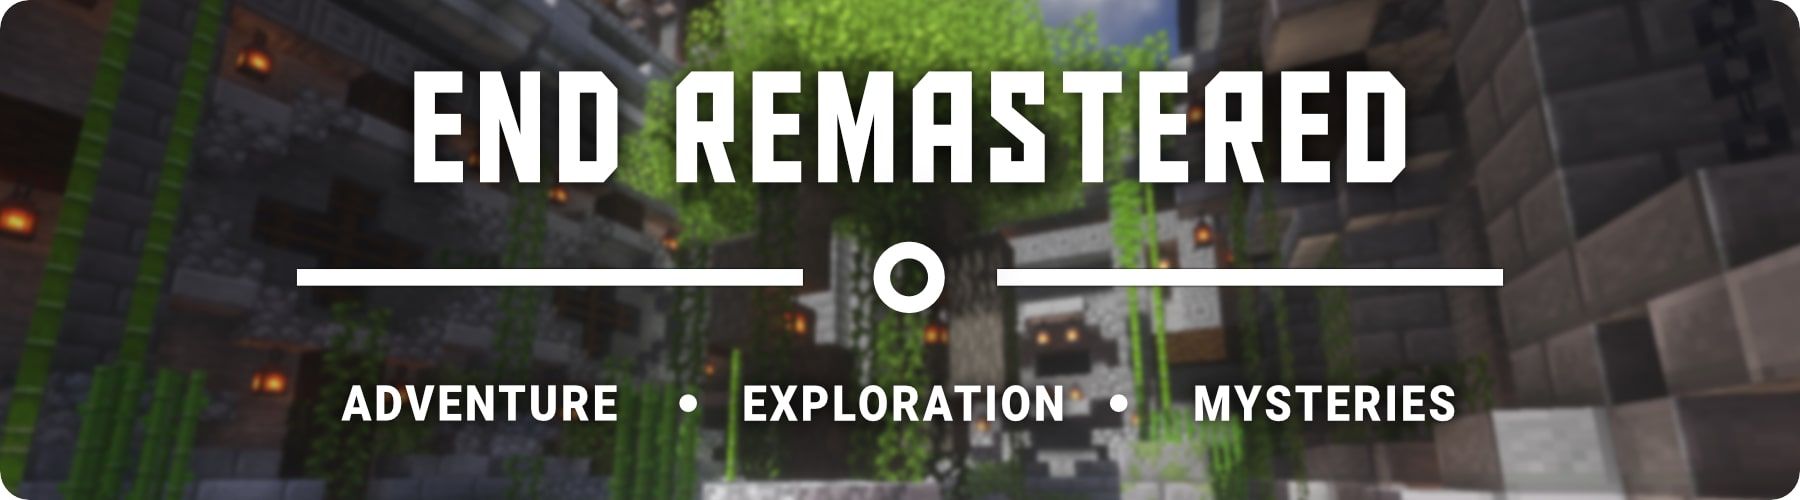 A blurred image of a Minecraft world, overlaid with text that reads, "End Remastered: Adventure, Exploration, Mysteries."